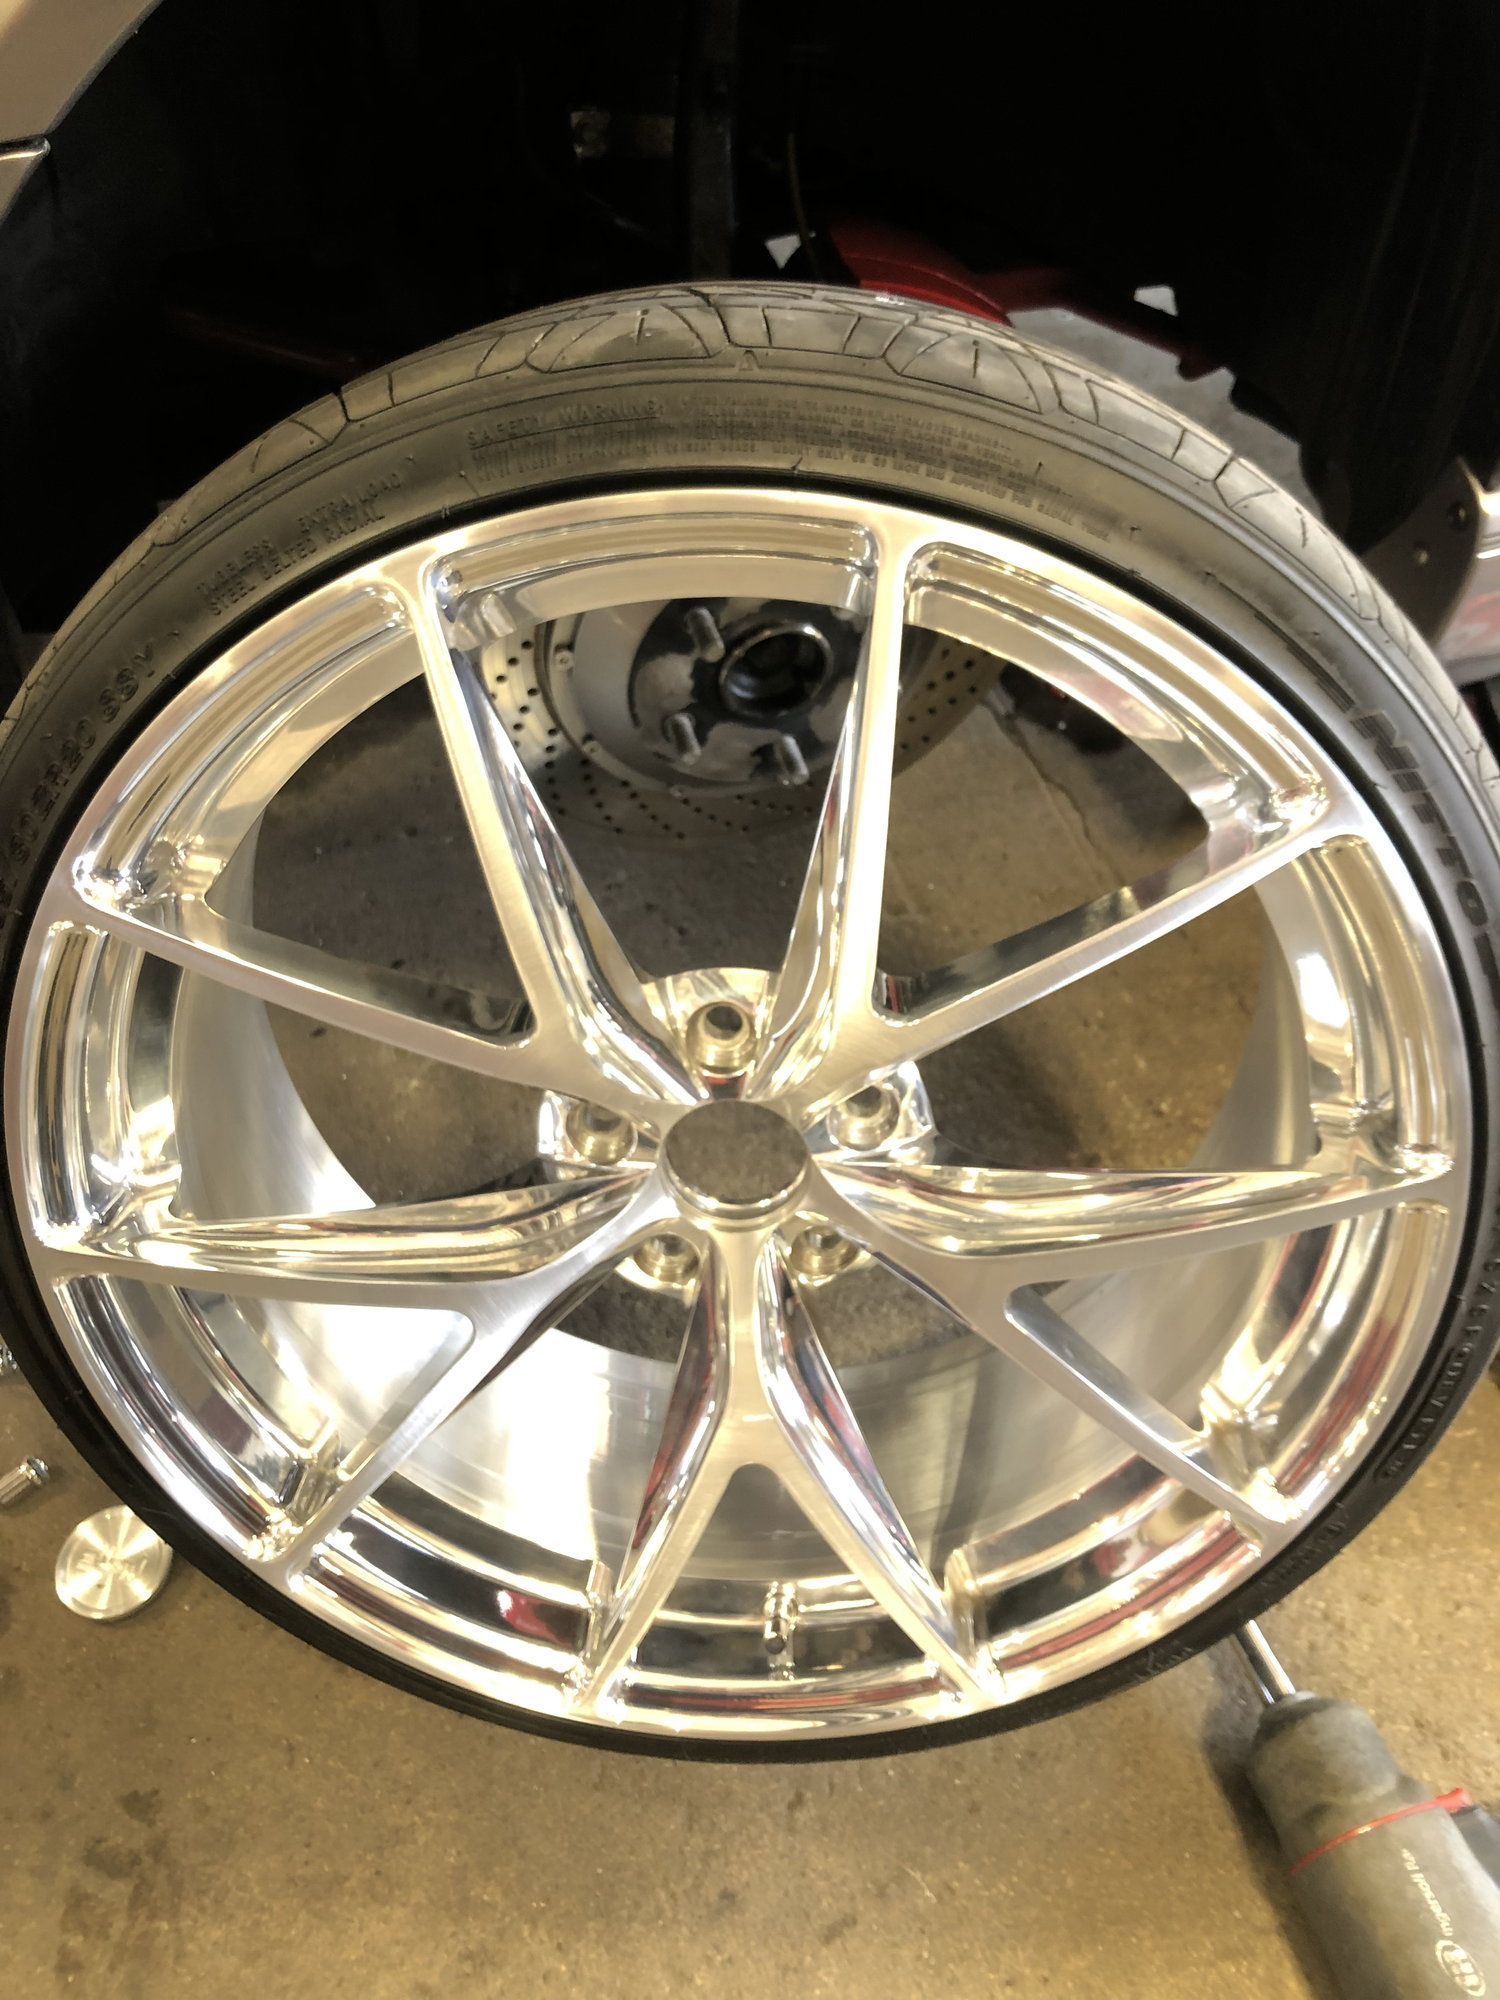 Wheels and Tires/Axles - FS: Niche custom forged wheels - Used - 2001 to 2005 Lexus IS300 - 2000 to 2019 Any Make All Models - Kokomo, IN 46902, United States